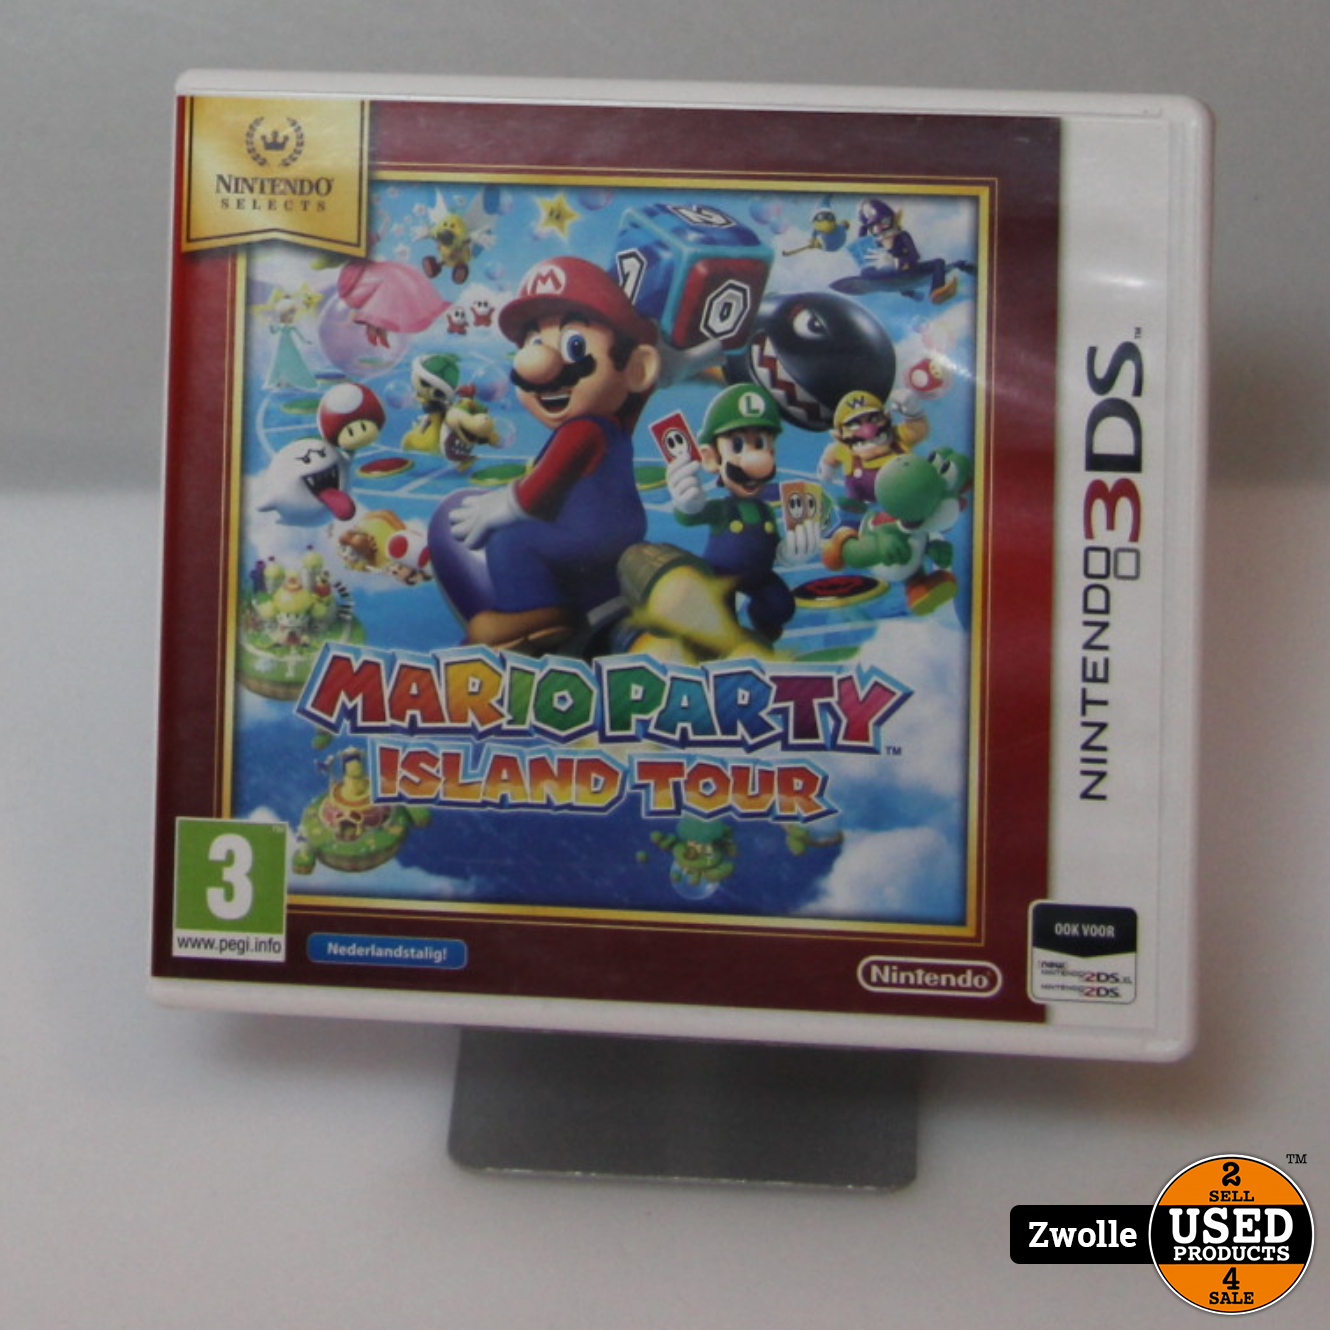 herstel vloeiend Uitgaan nintendo Nintendo 3DS Game | Mario Party Island Tour - Used Products Zwolle